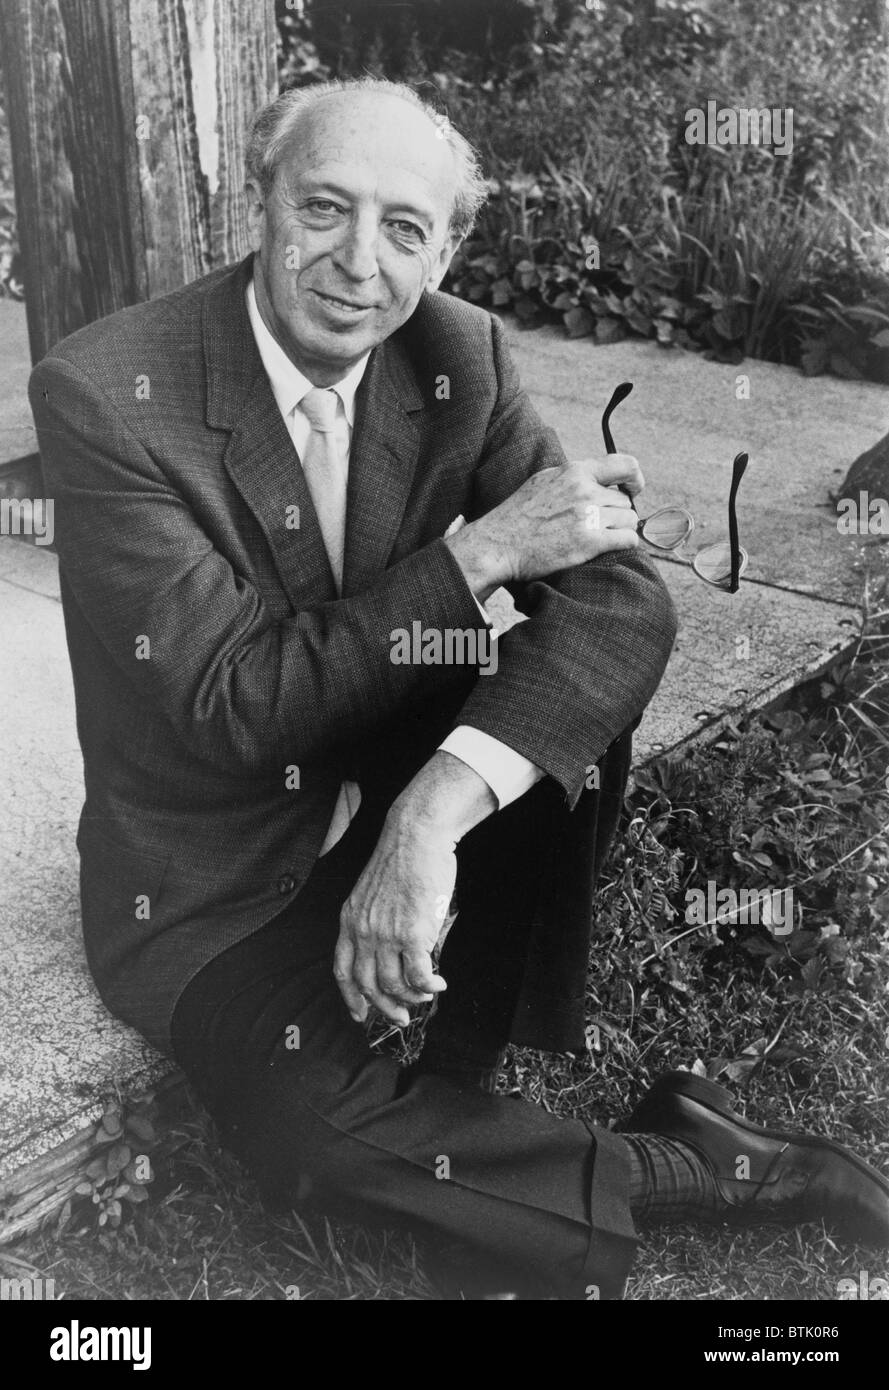 Aaron Copland (1900-1990), American composer, seated outdoors at the MacDowell Colony, a prestigous artists' colony in New Hampshire, 1965. Stock Photo